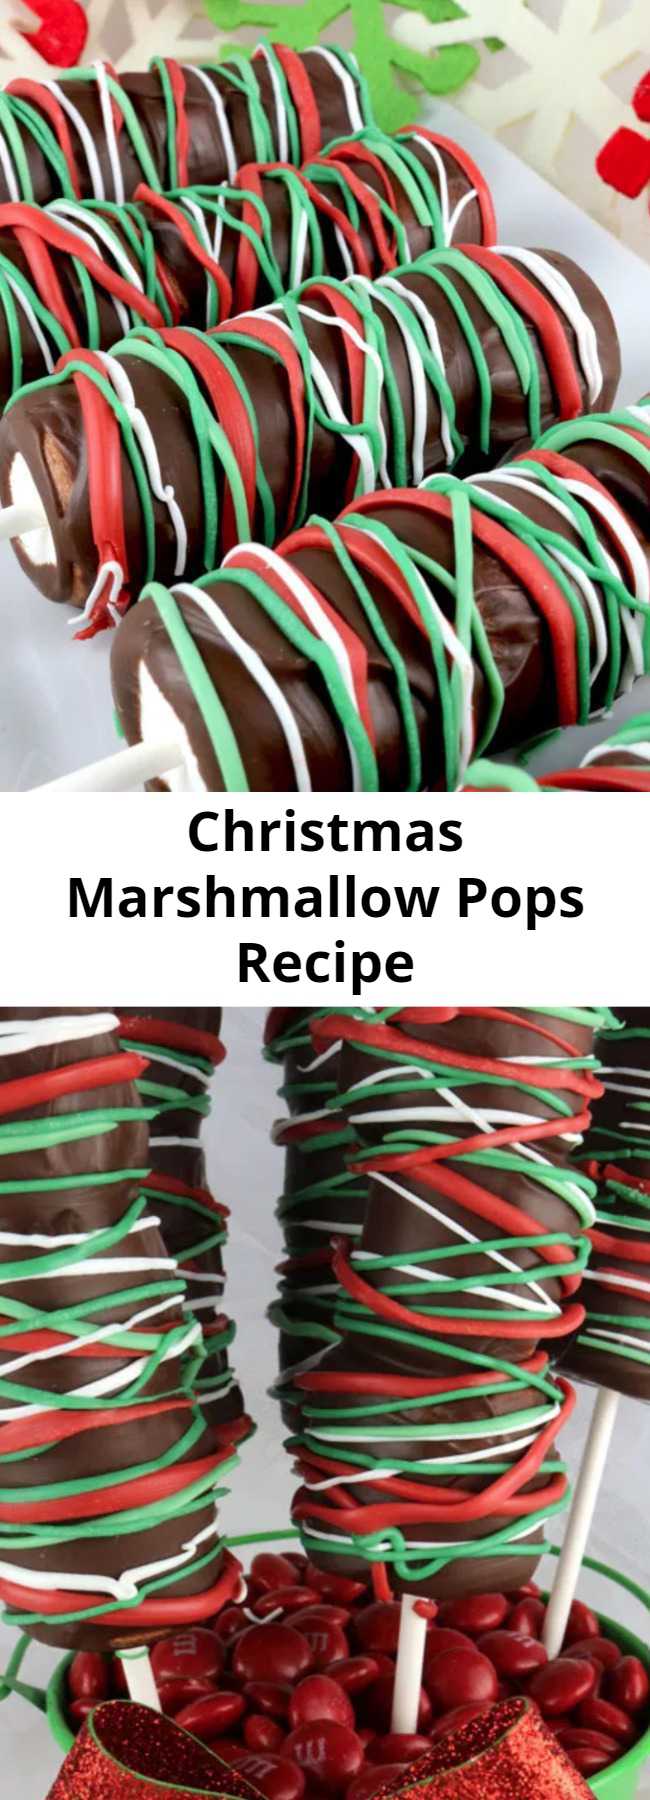 Christmas Marshmallow Pops Recipe - Marshmallows on a stick covered with chocolate and decorated with Red Green and White candy melts, these Christmas Marshmallow Pops are tasty and adorable. #HolidayTreat #HolidayTreats #HomemadeCandy